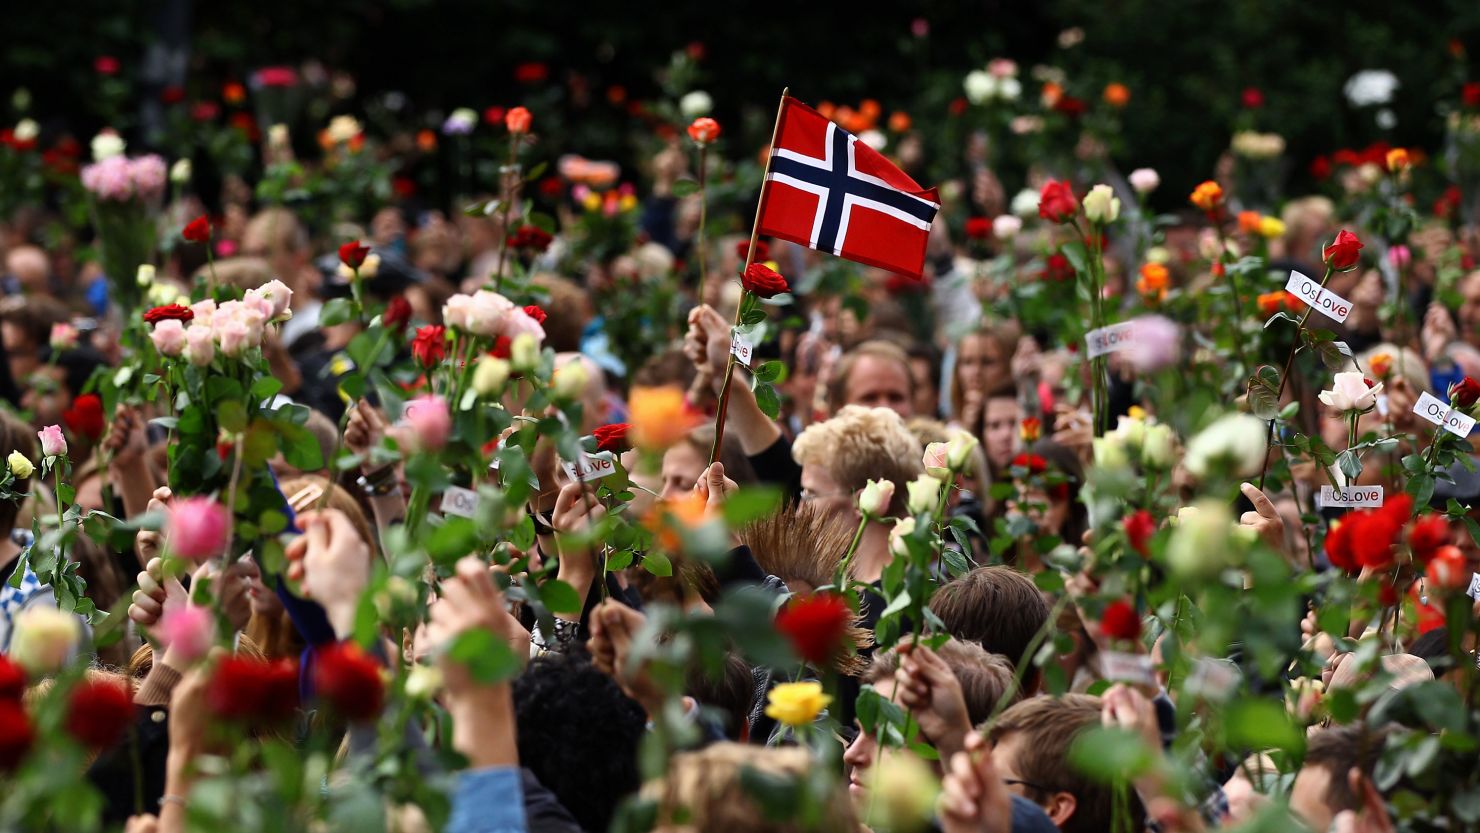 A far-right extremist killed 77 people in Norway. A decade on, 'the hatred  is still out there' but attacker's influence is seen as low